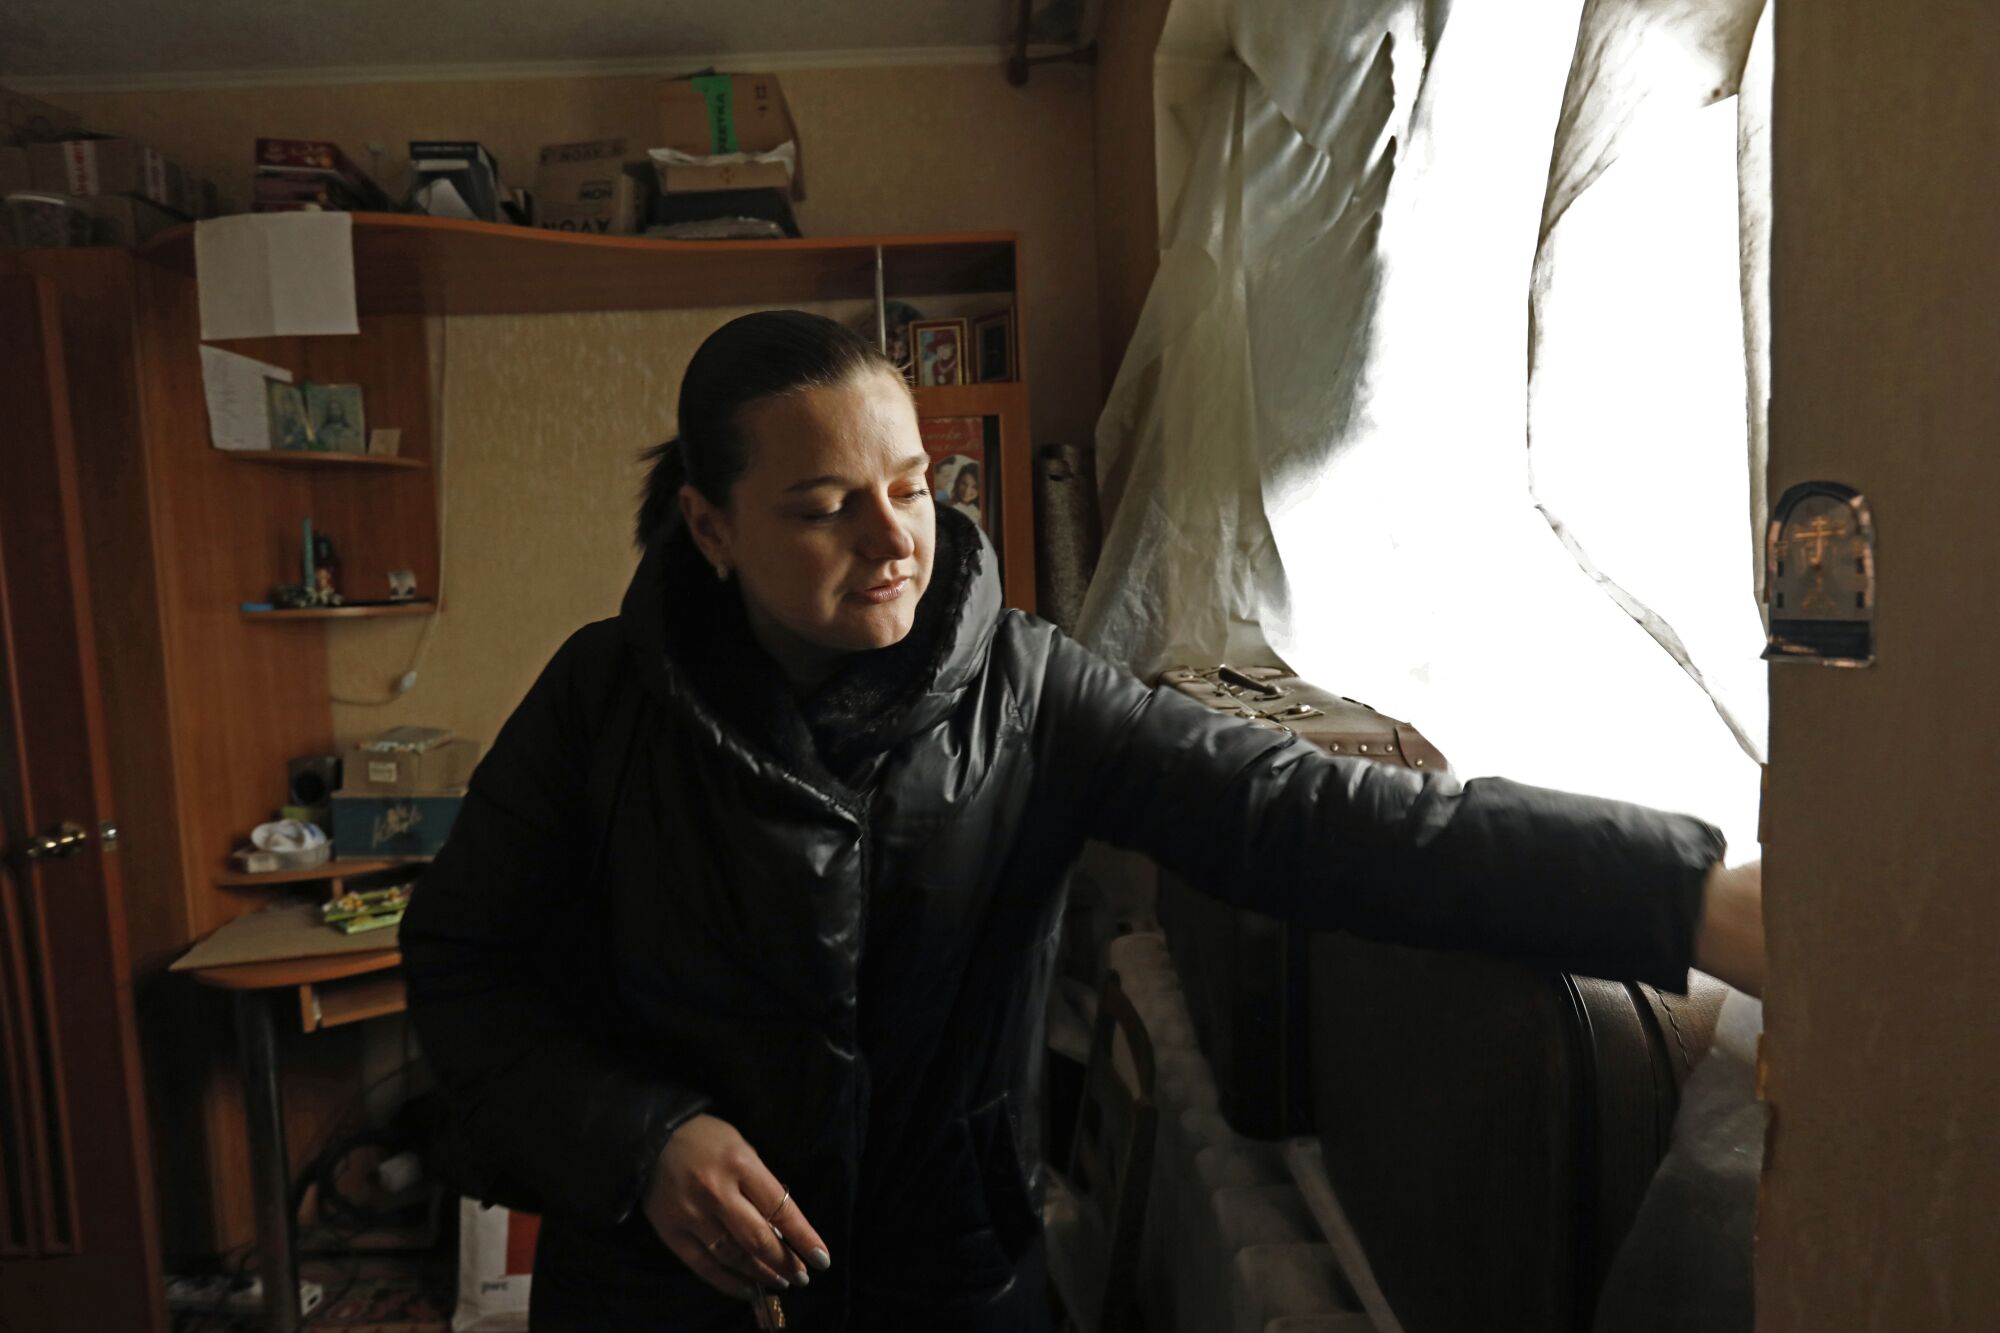 34-year-old Olga Drabi has lived on Tsentralna Street all her life